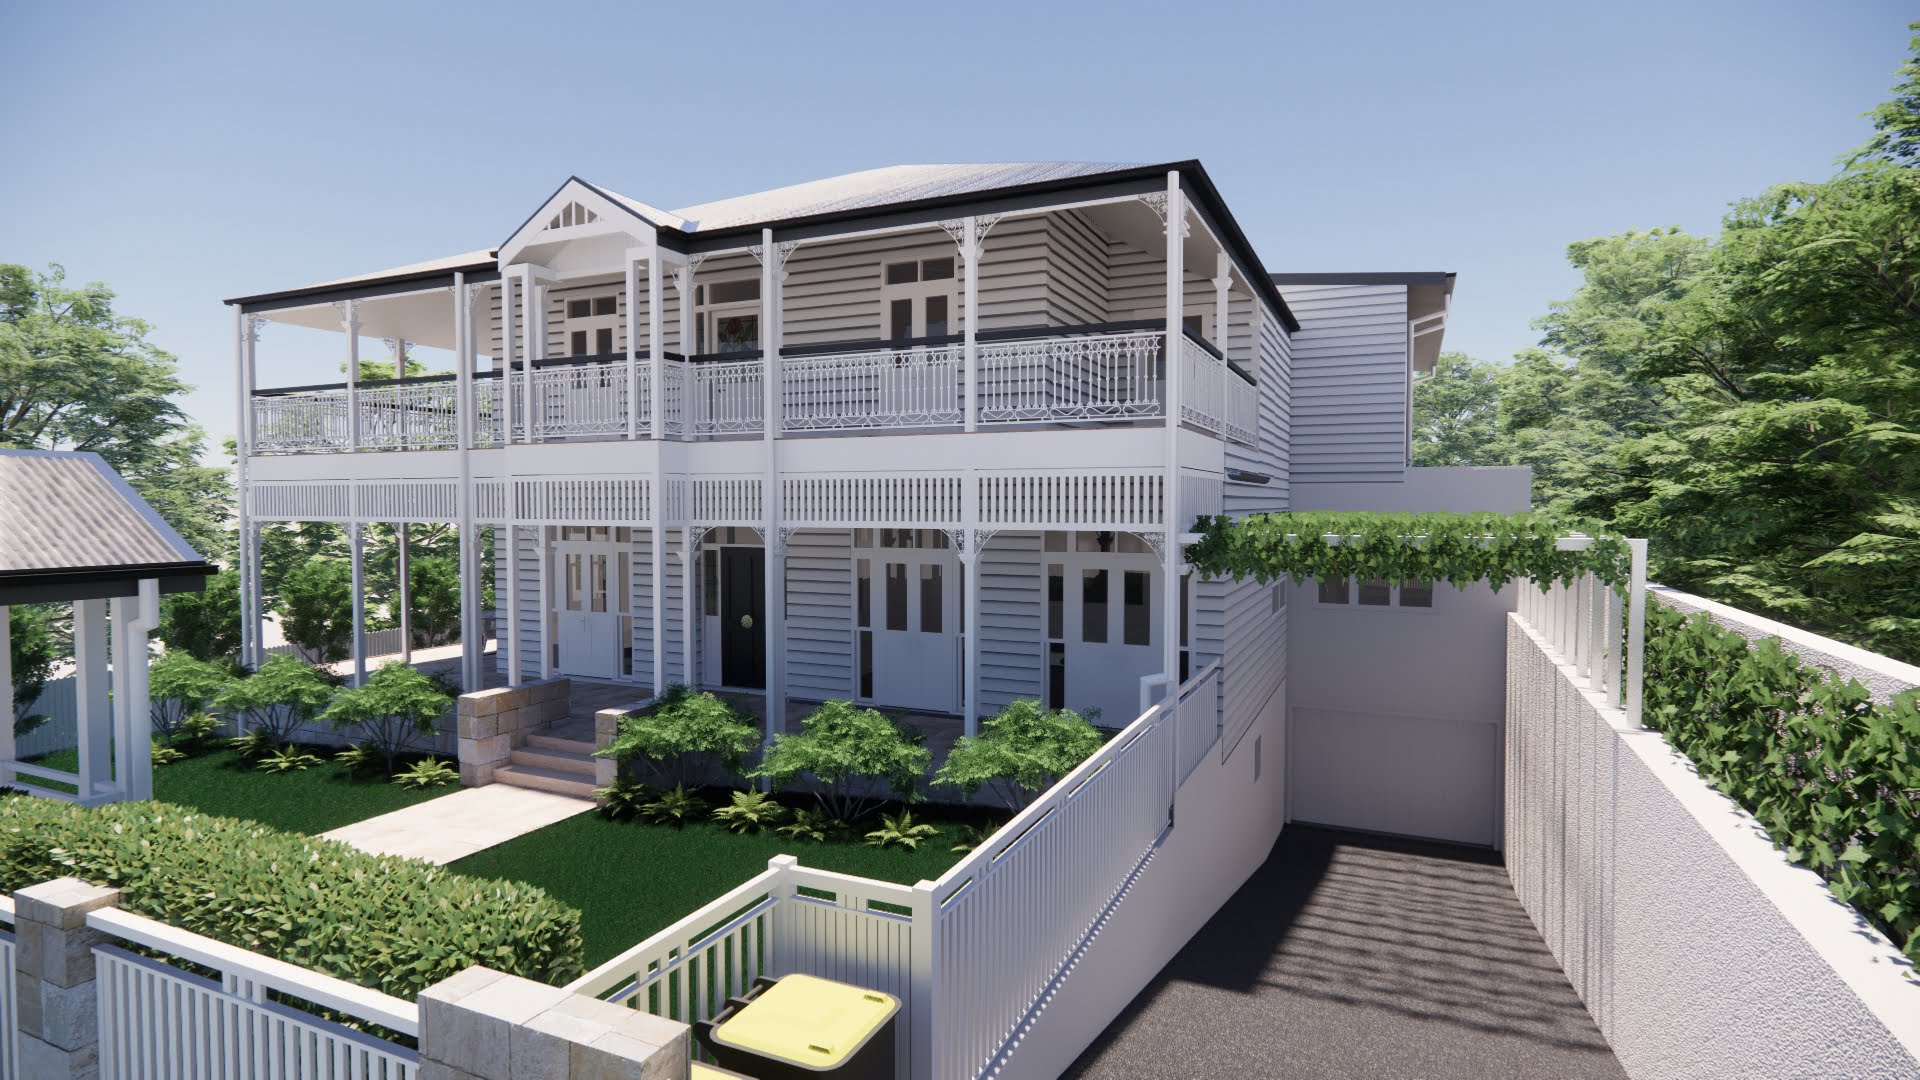 Front view of a renovated Queenslander with a spacious garden | Featured image for the Queenslander Renovations service page from Clements Clarke Architects.